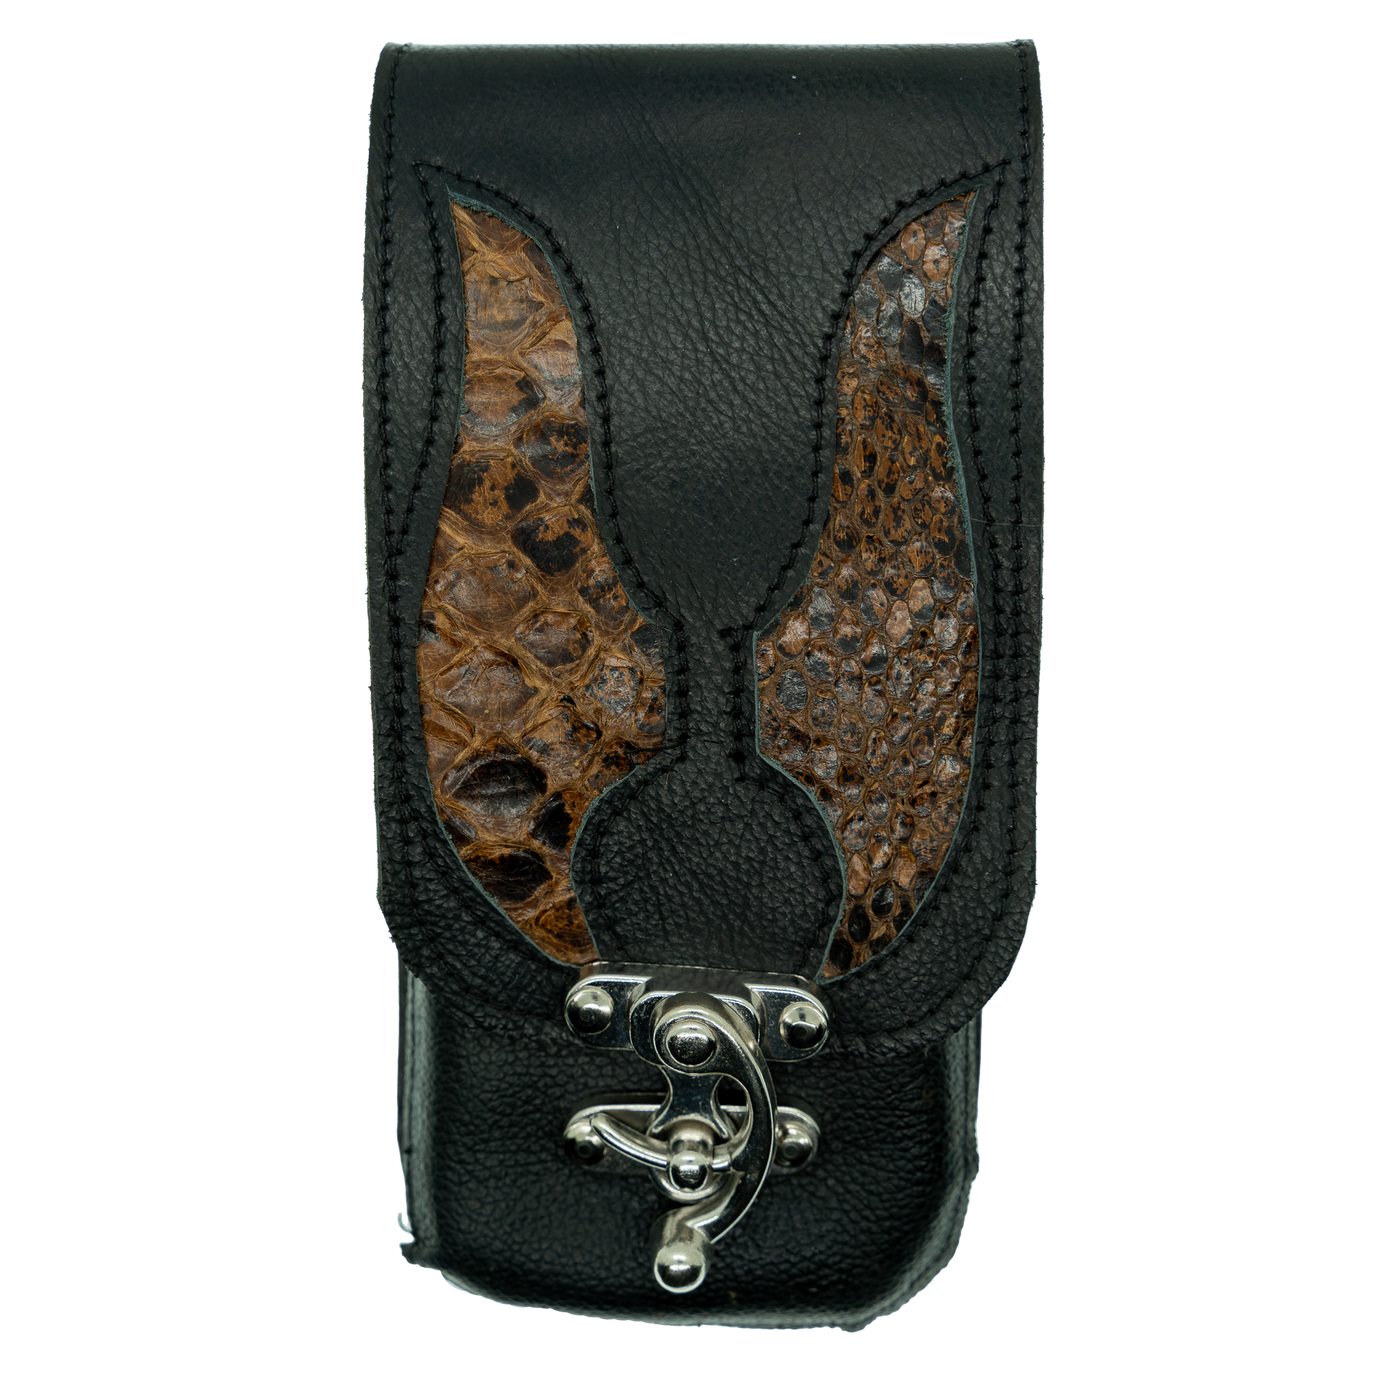 Leather & Vintage Python Snakeskin Mobile Phone Pouch